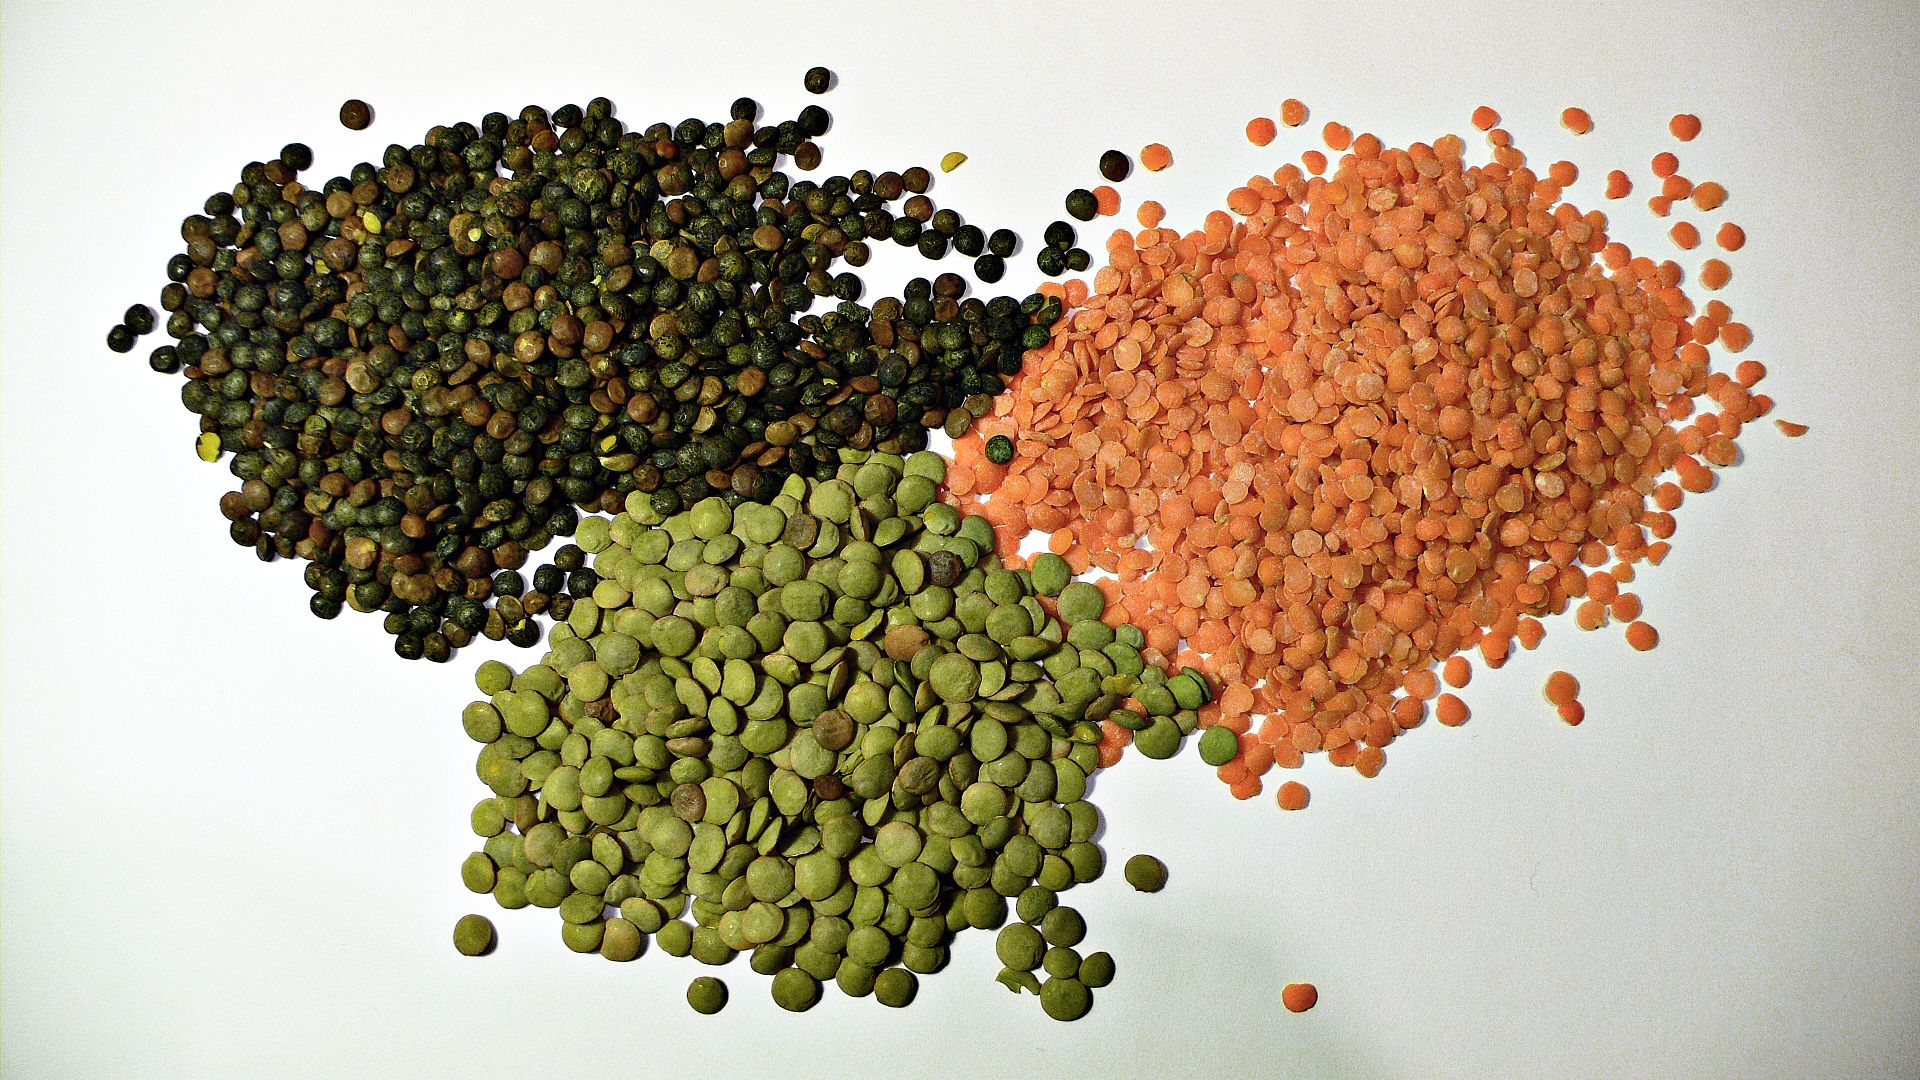 Source: 3 types of lentil". Licensed under CC BY-SA 2.0 via Wikimedia Commons.